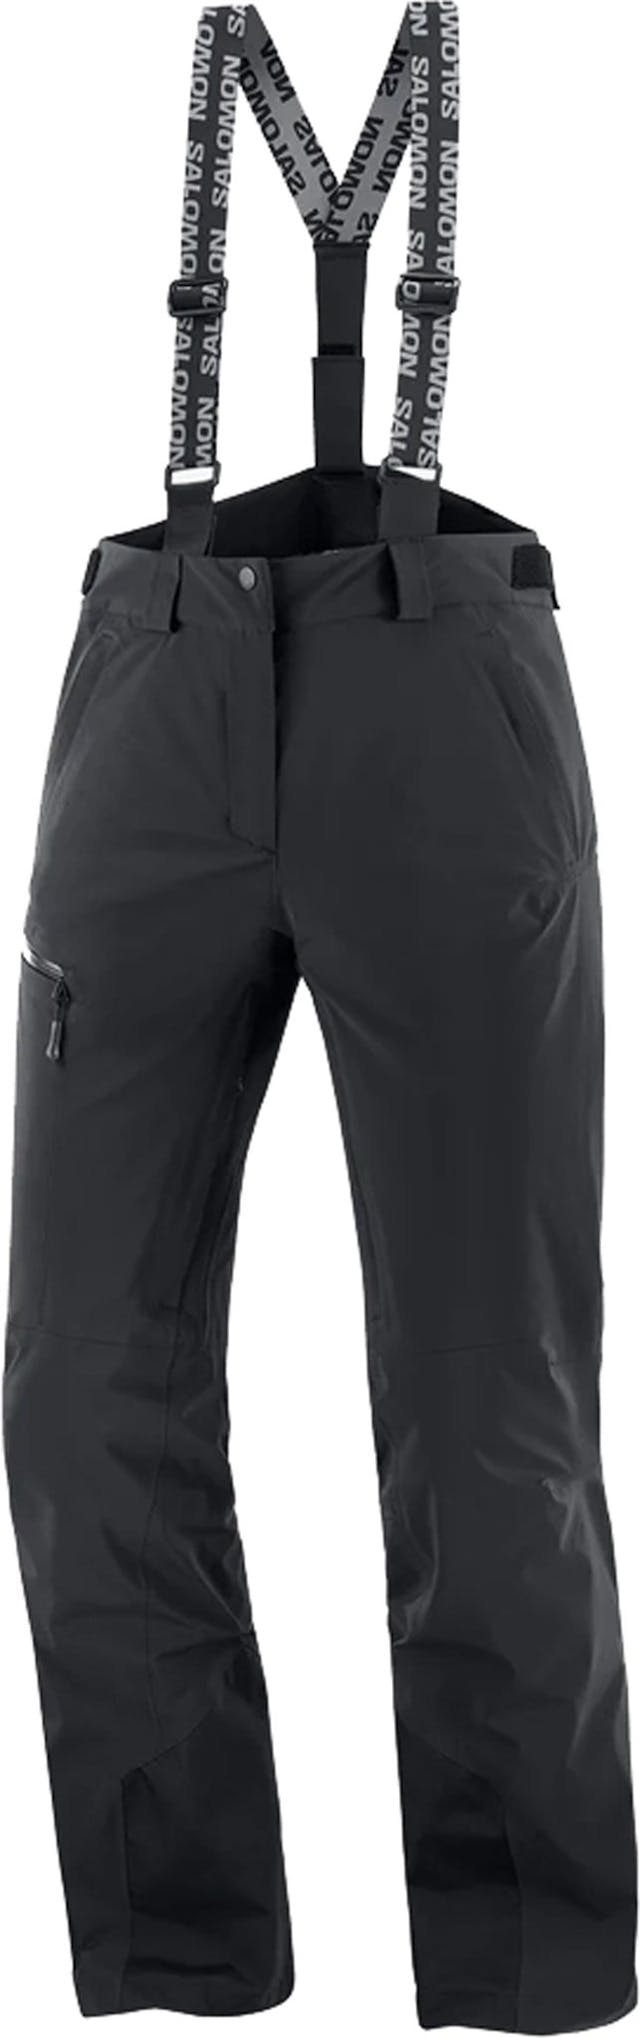 Product image for Brillant Insulated Pants - Women's